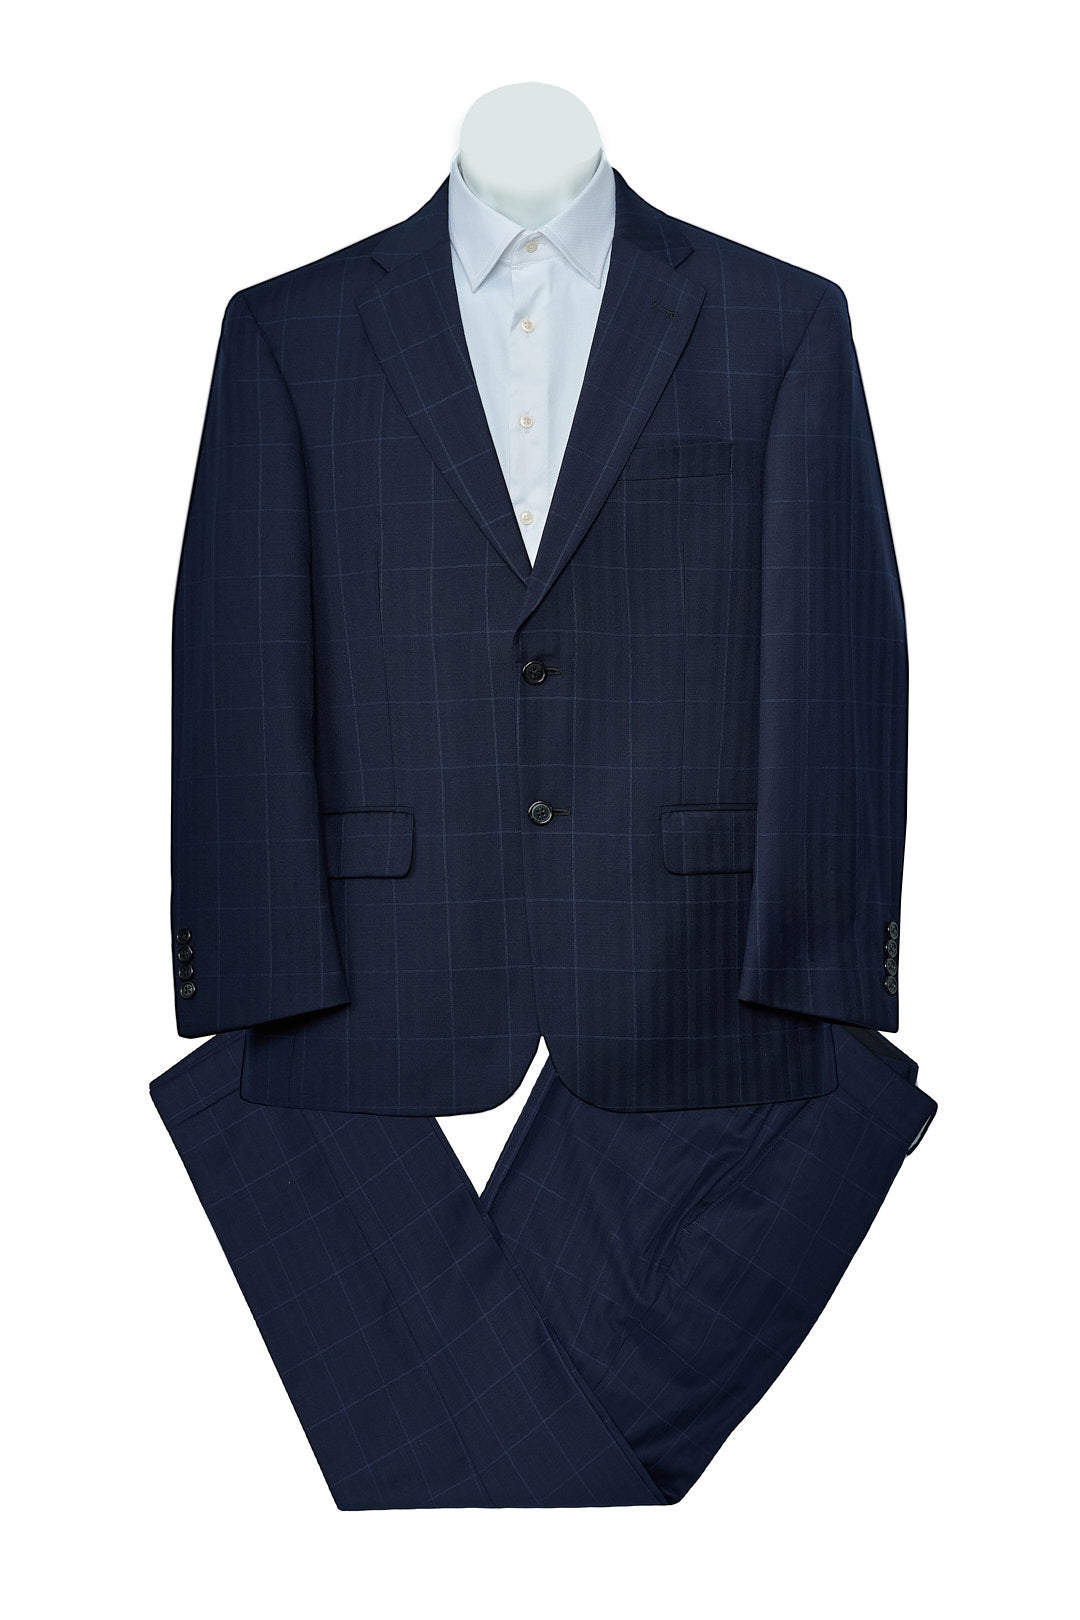 "The Square" Wool Suit